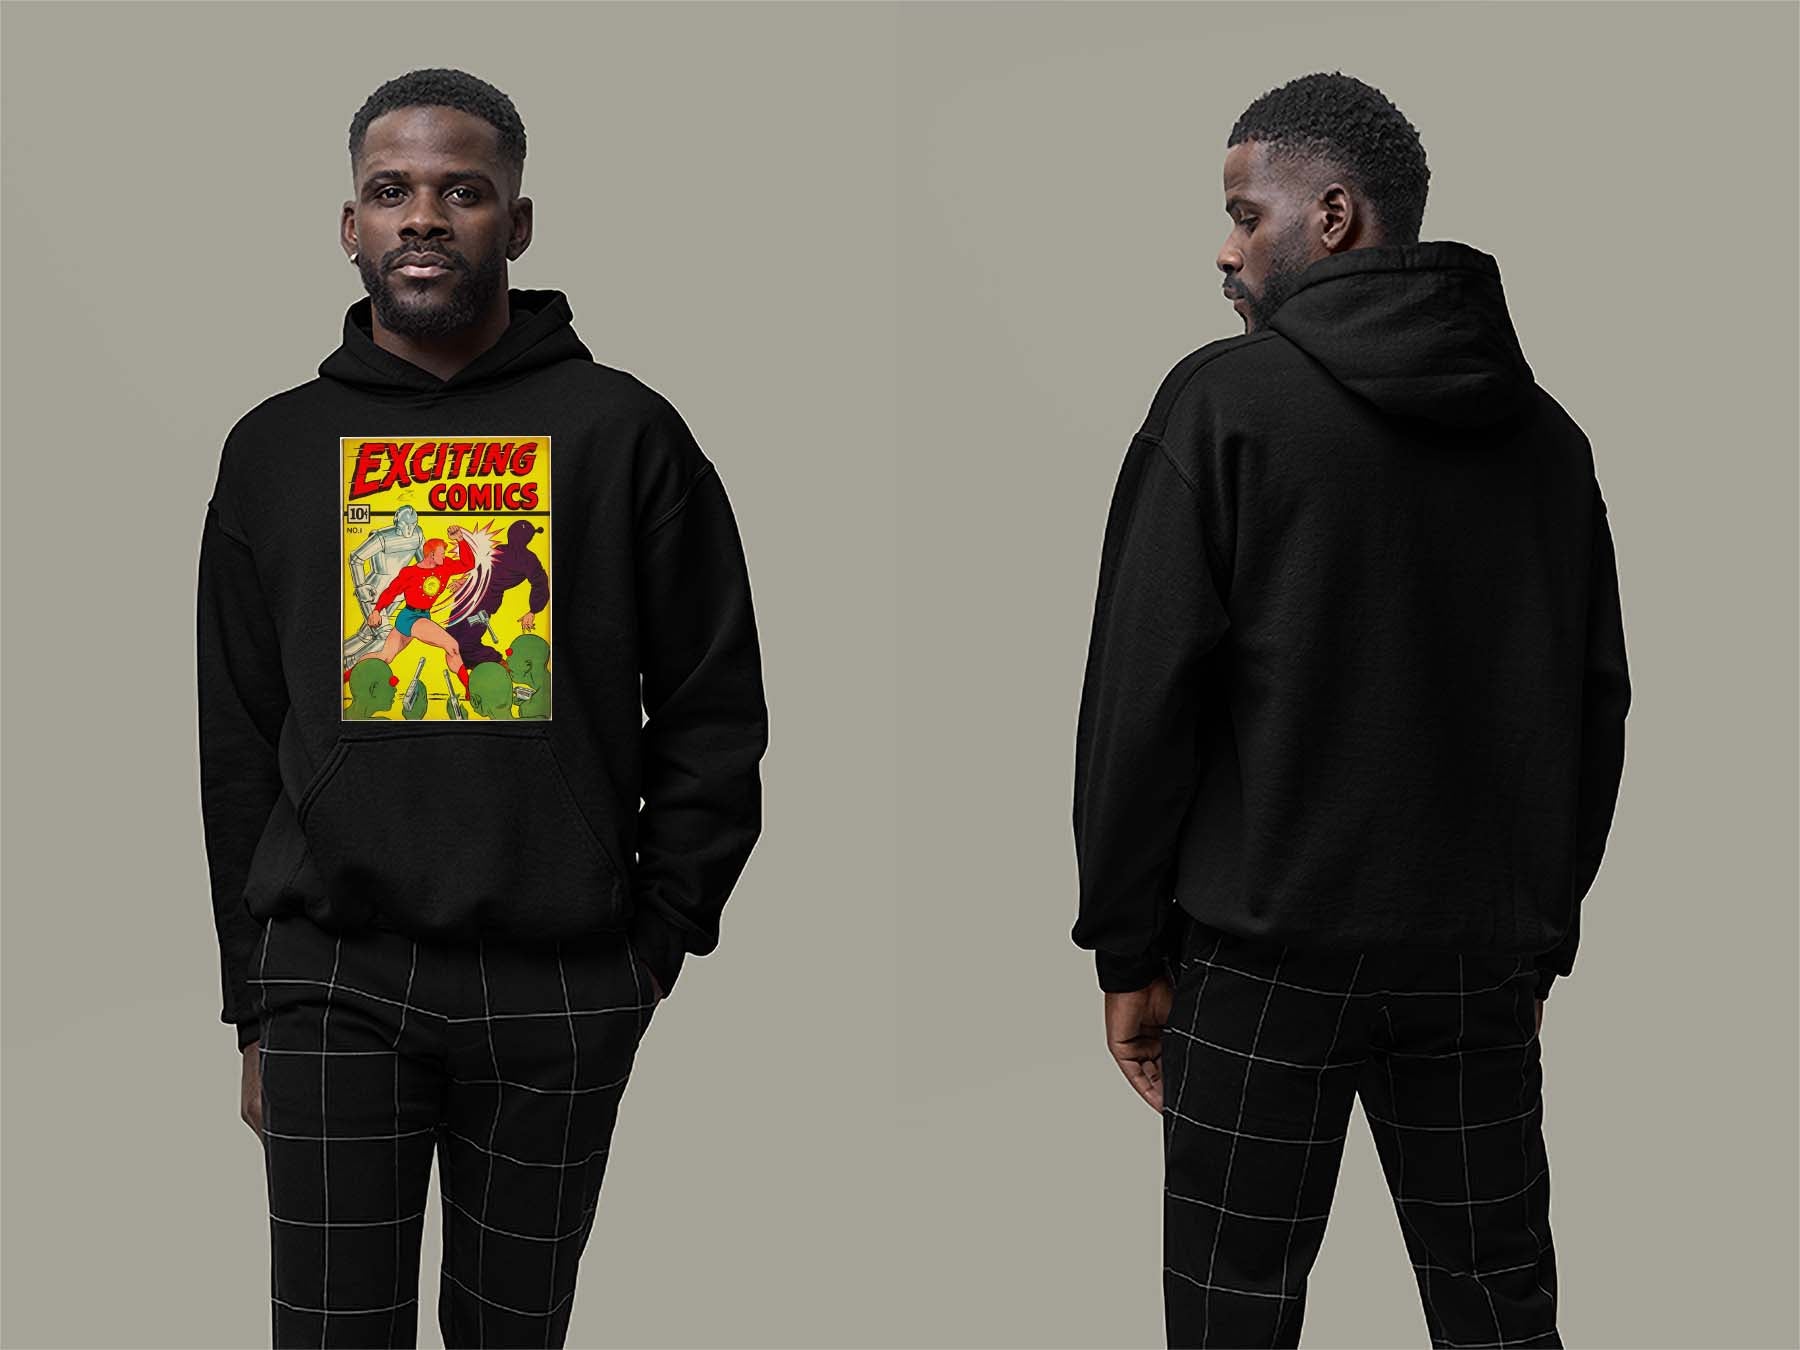 Exciting Comics No.1 Hoodie Small Black